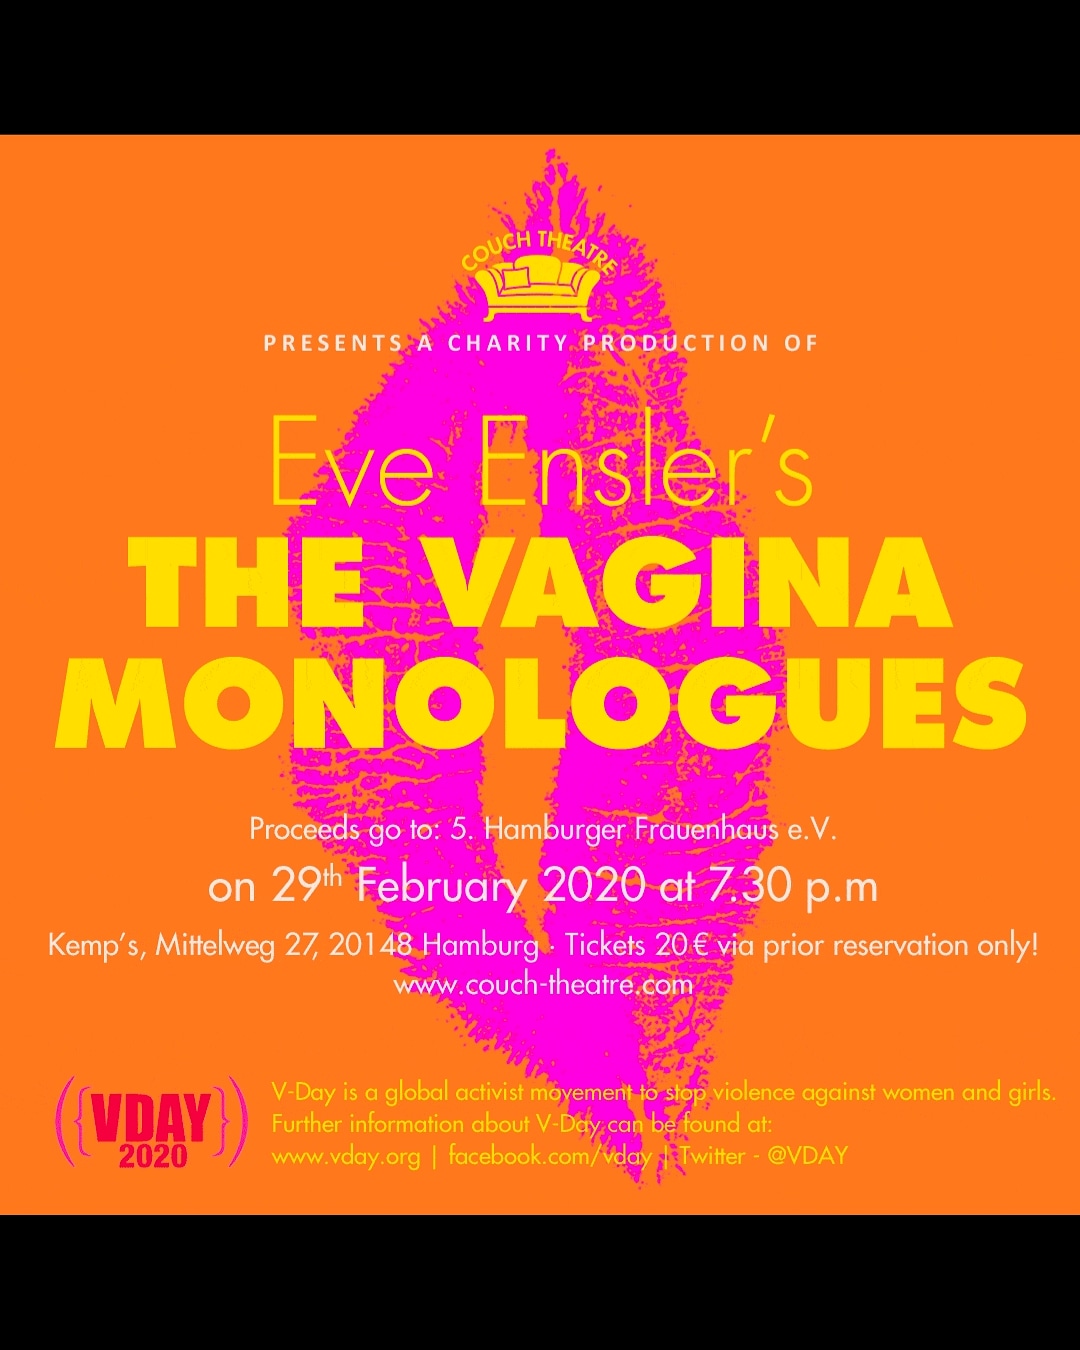 The Vagina Monologues by Eve Ensler